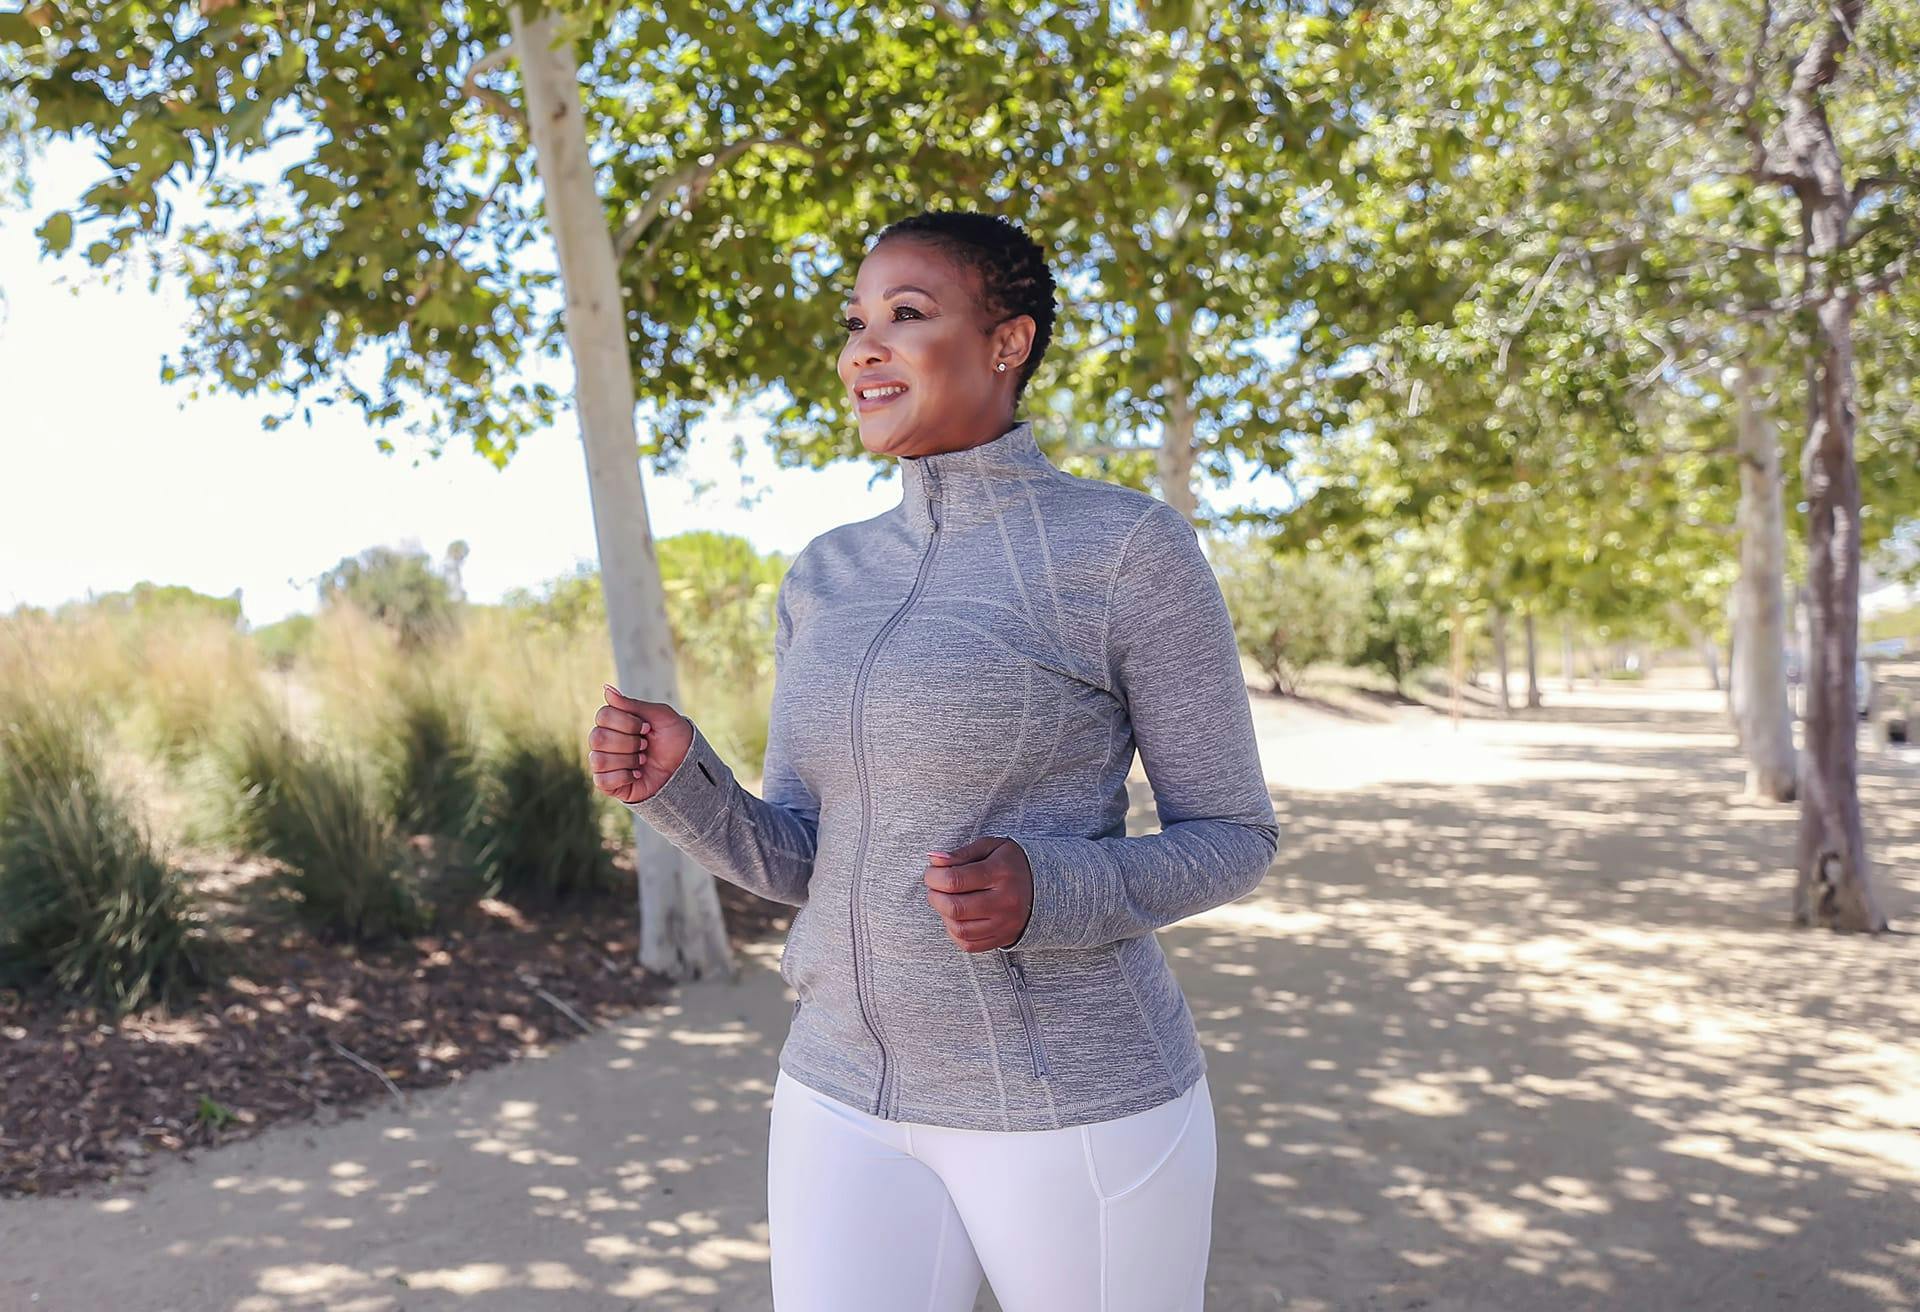 smiling woman in grey jacket and white pants jogging on a path